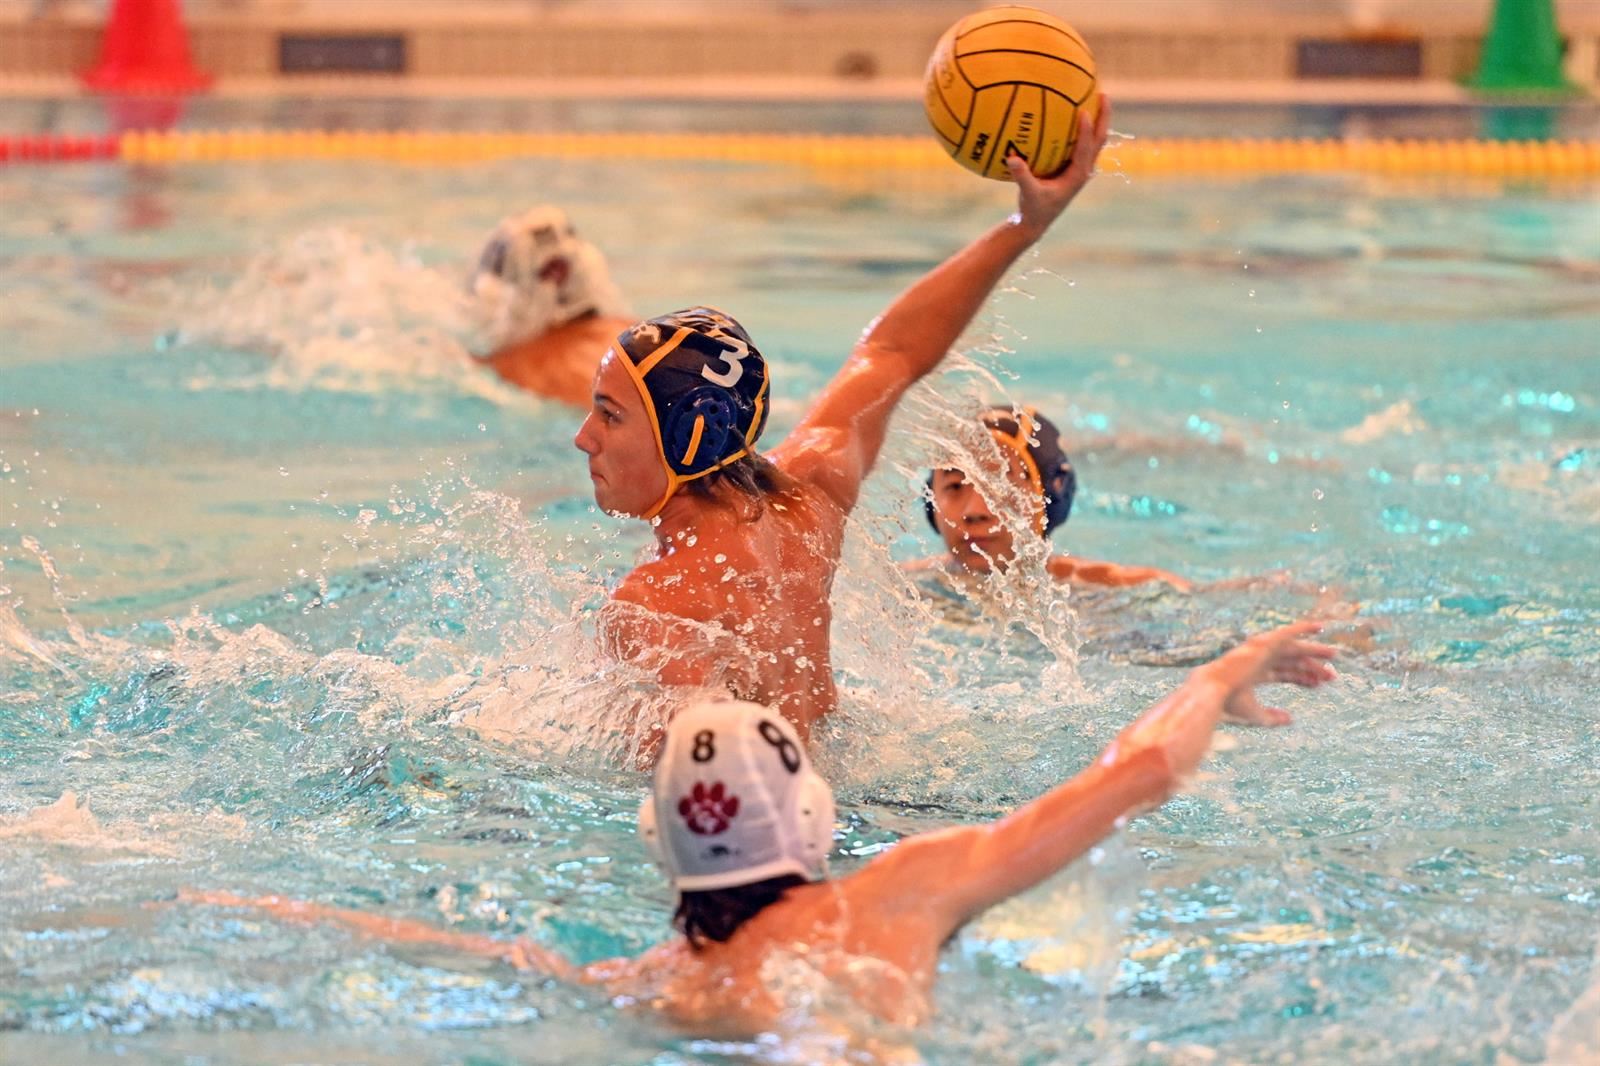 Cypress Ranch High School sophomore Ace Shirley was voted the District 16-6A boys’ water polo Newcomer of the Year.